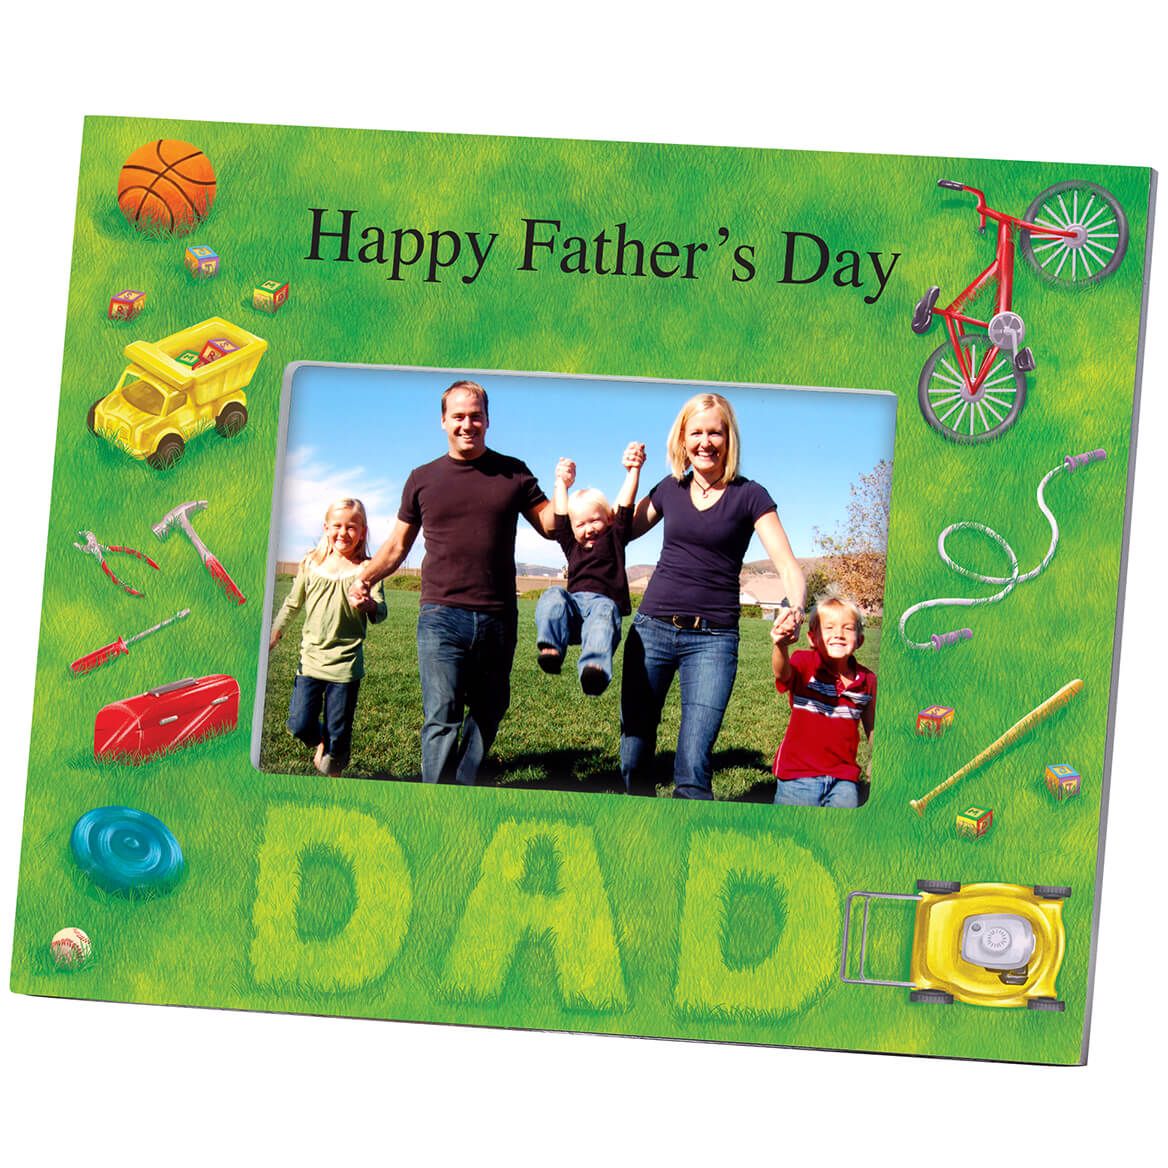 Personalized Lawn Words Dad Frame + '-' + 361188